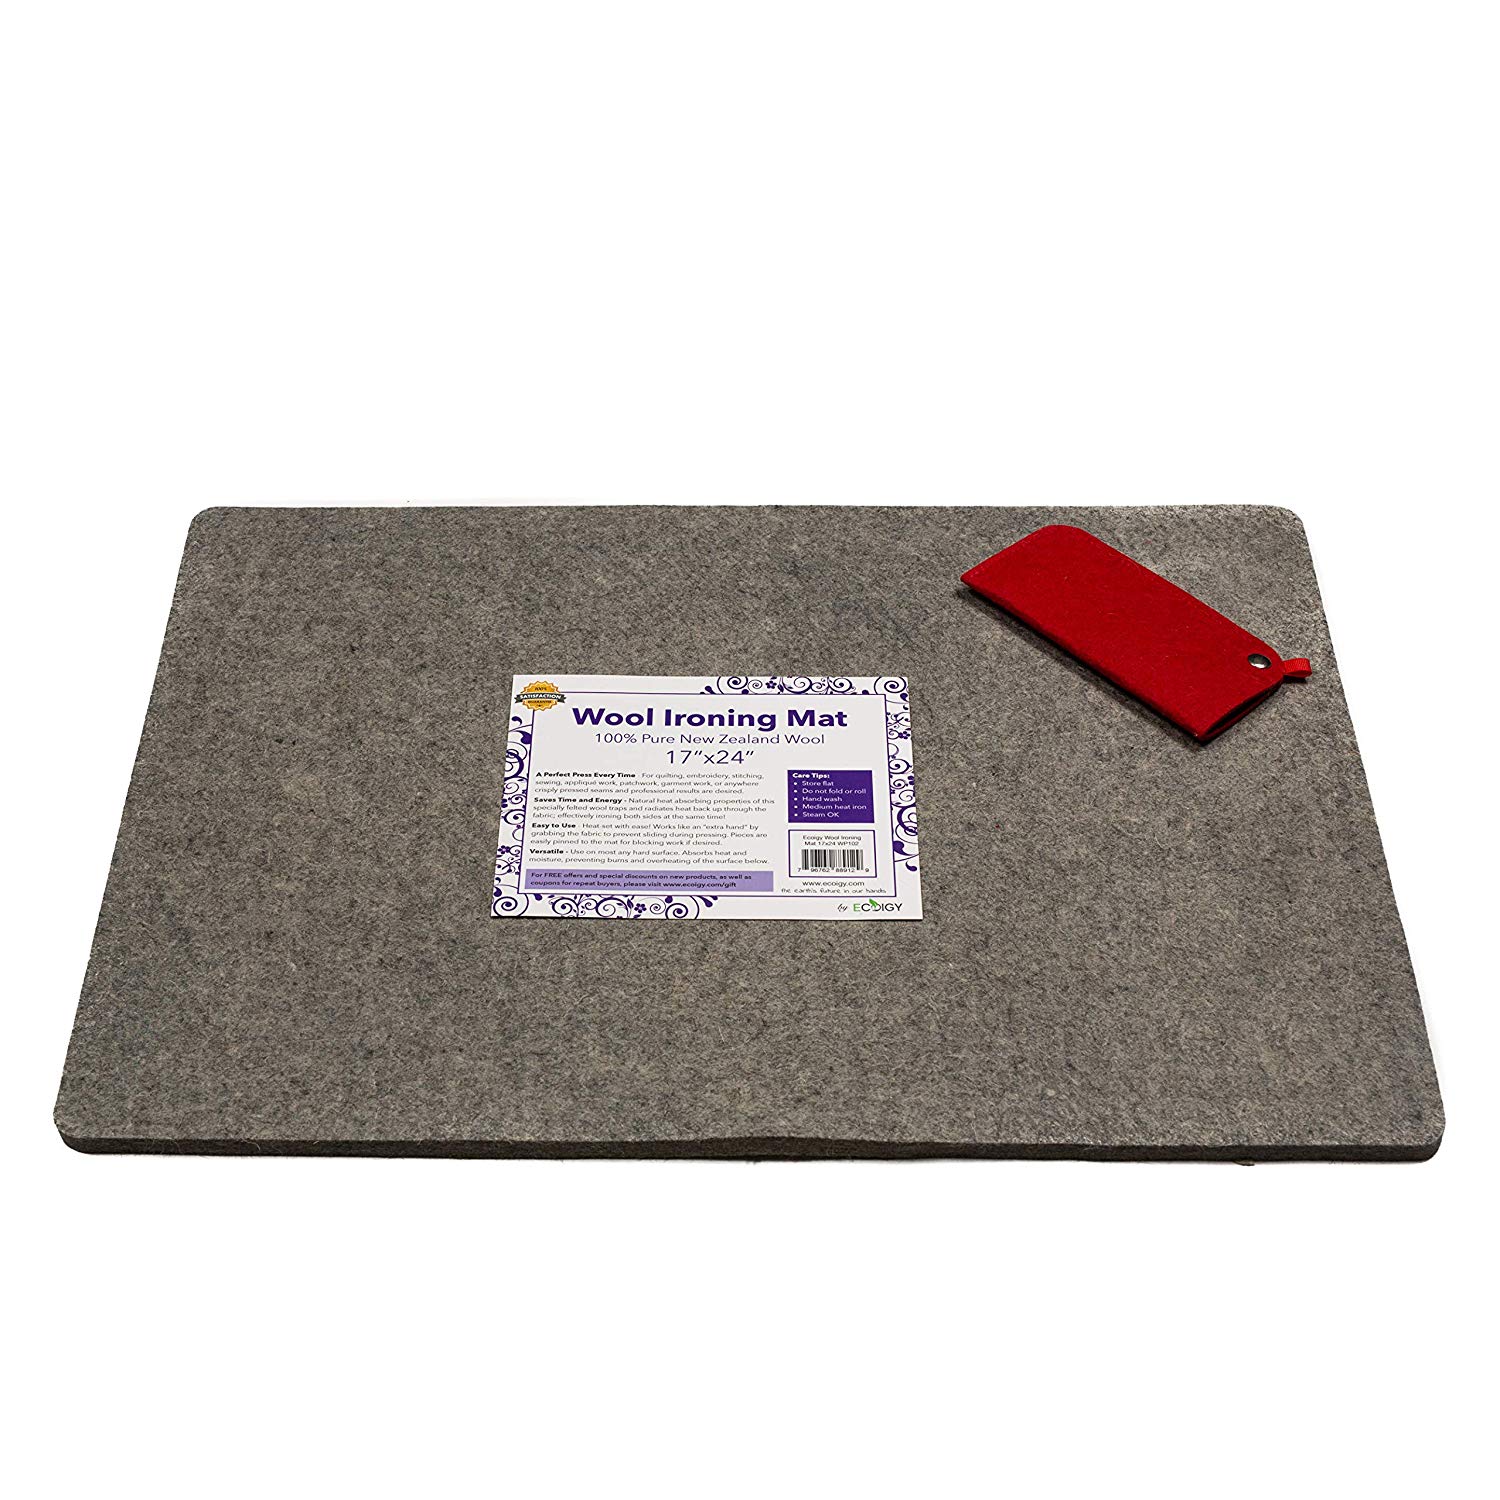 Coobe Set 17 X 24 Wool Pressing Mat for Quilting Large Size & 10 X 10 Portable Size with Carrying Case and Iron Rest Perfect for Classes and Travel 100% New Zealand Wool Felted Ironing Pads 